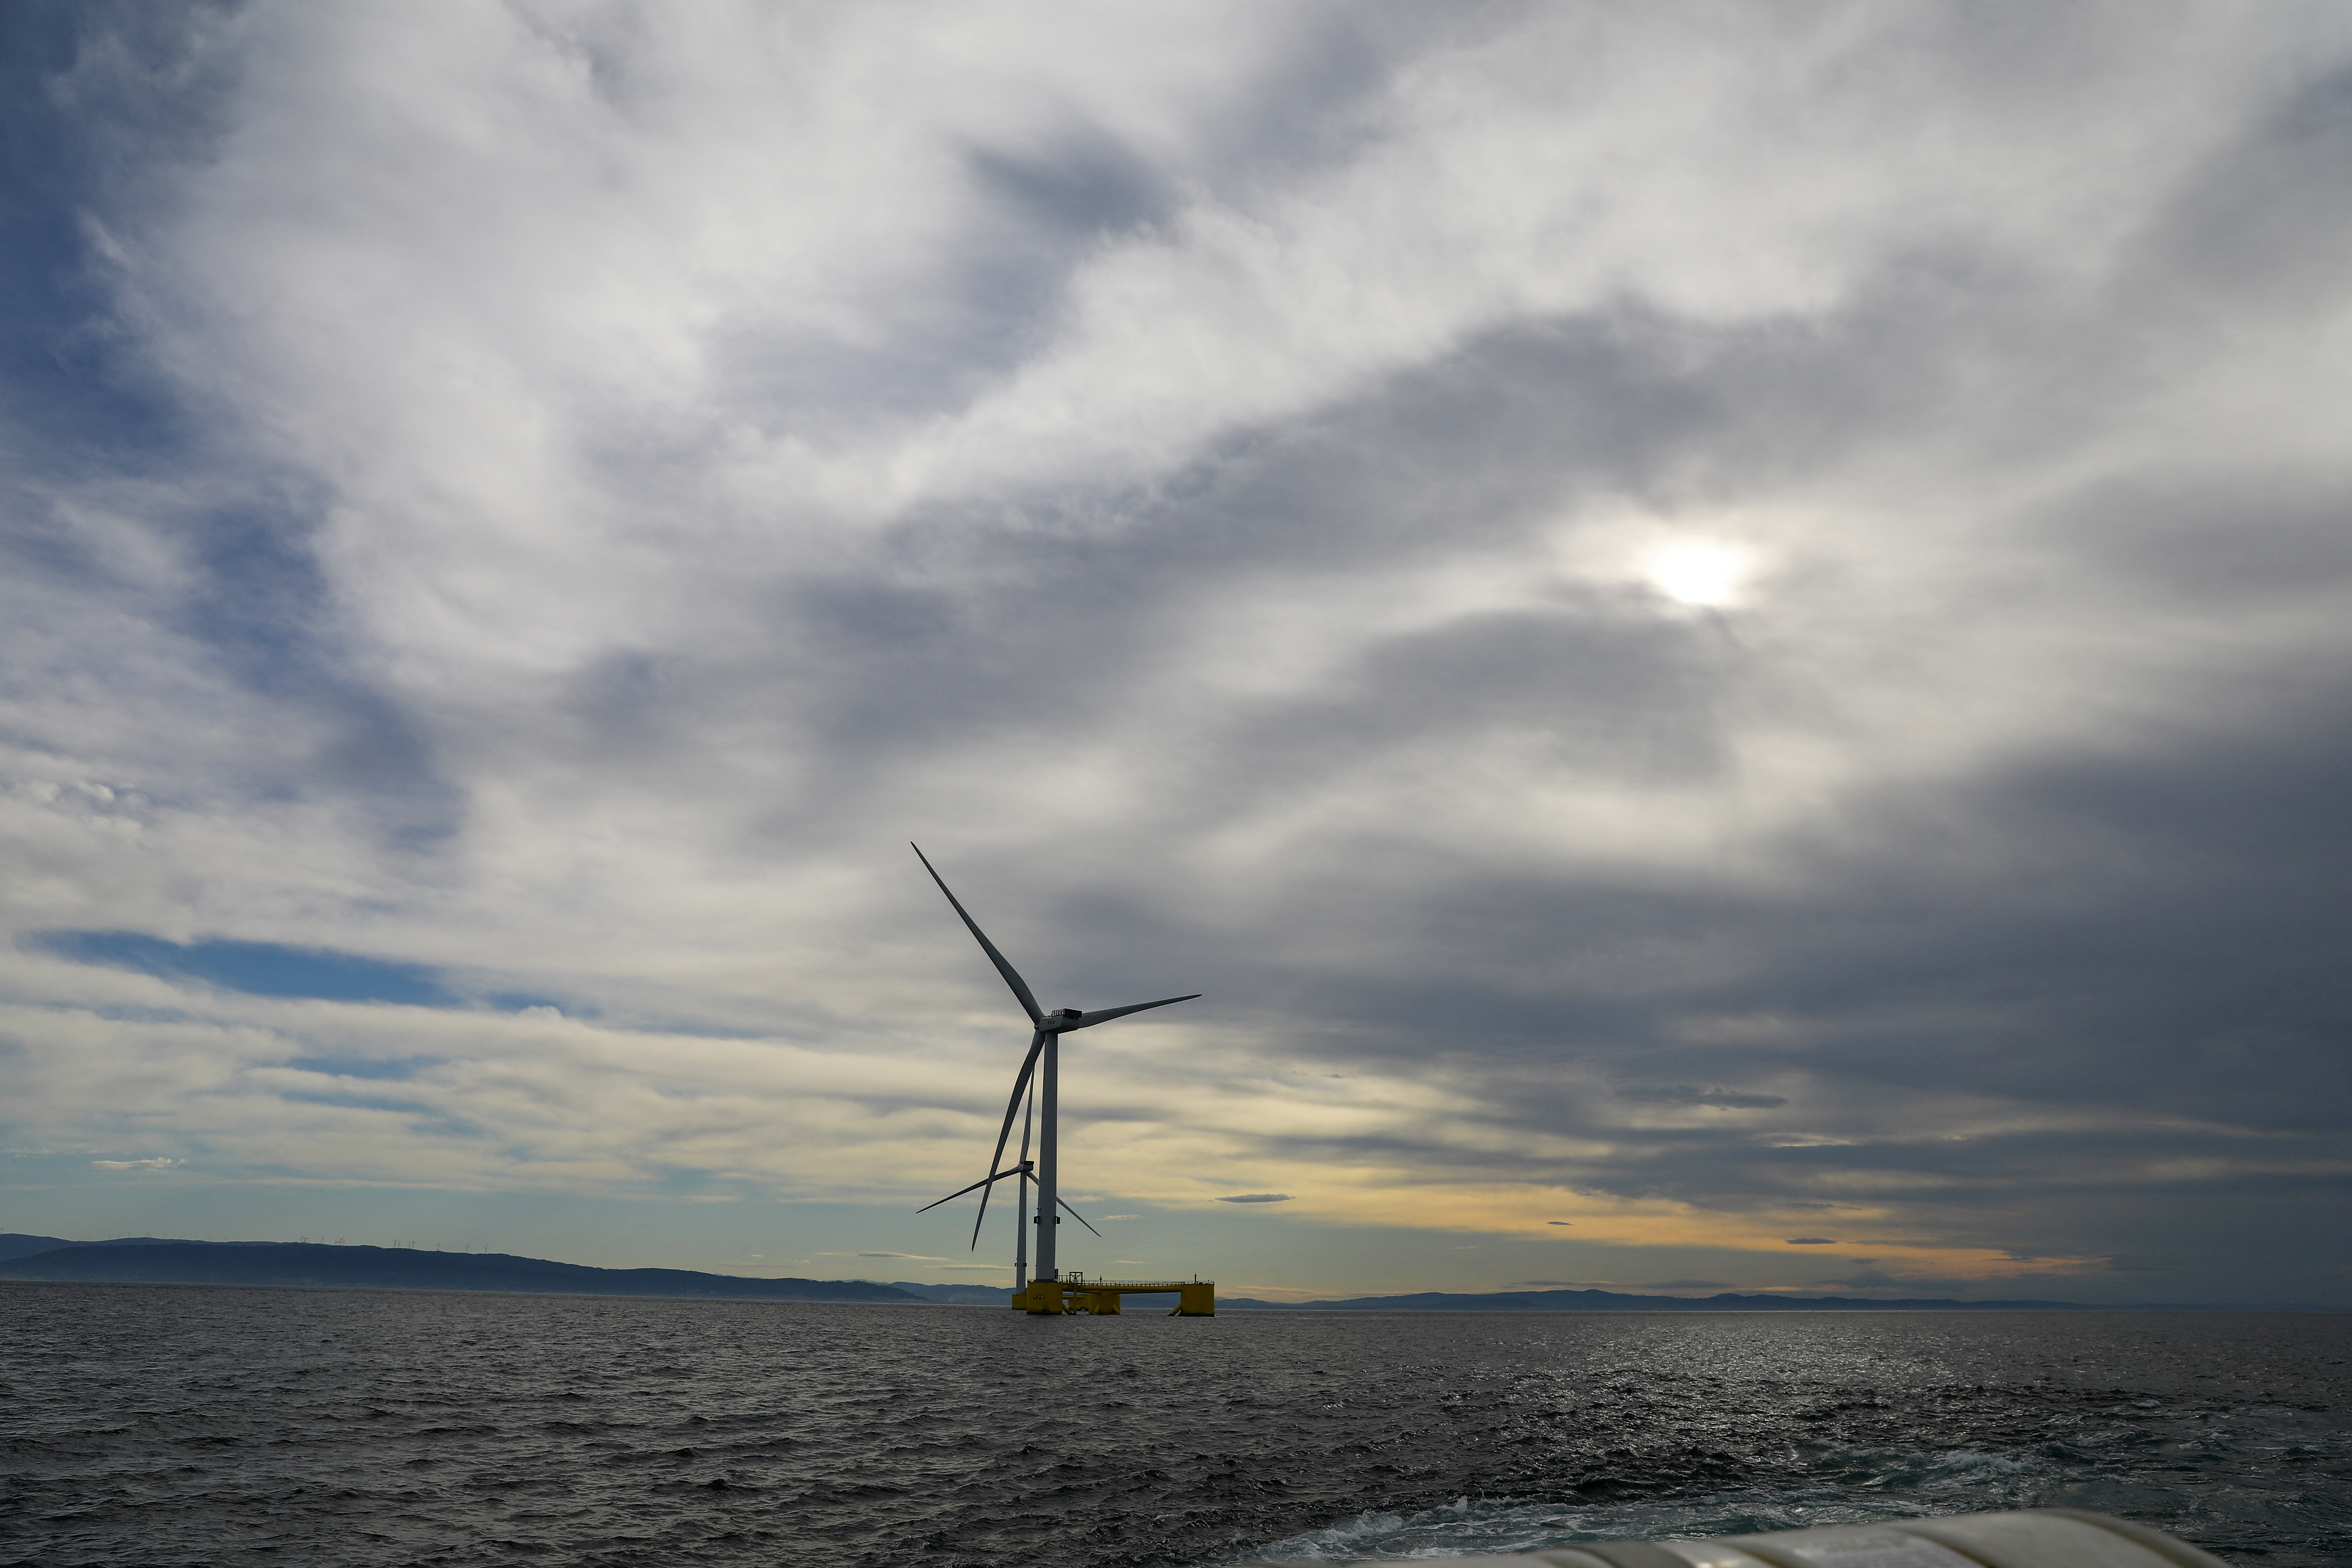 Turbines of the WindFloat Atlantic Project, a floating offshore wind-power generating platform, are seen 20 kilometers off the coast in Viana do Castelo